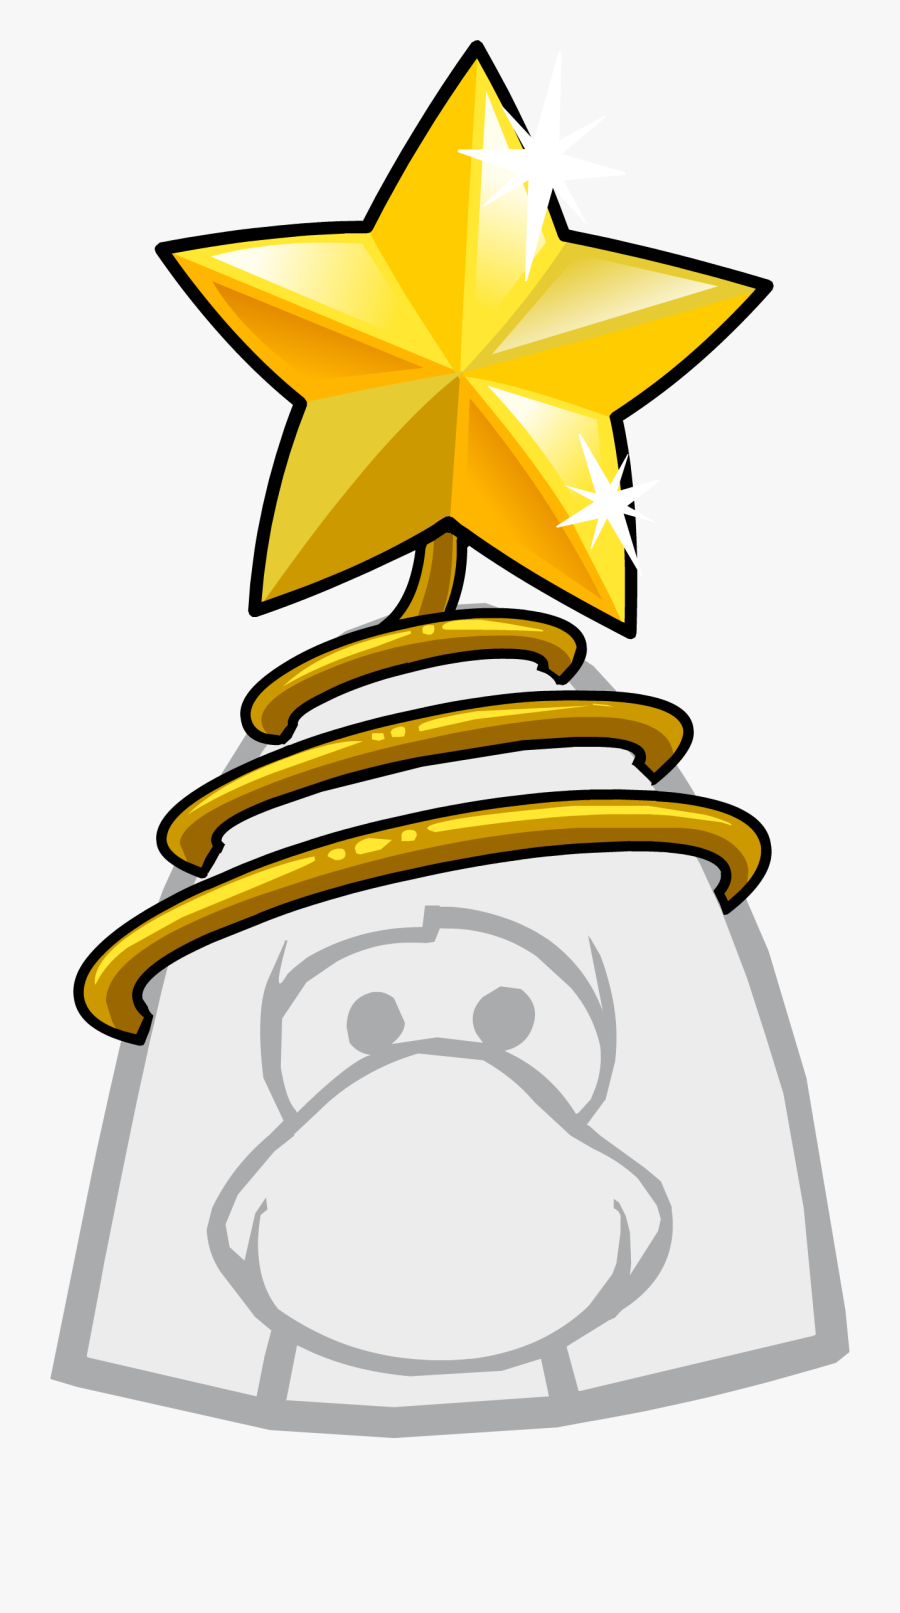 The Tree Topper - Club Penguin Optic Headset, Transparent Clipart